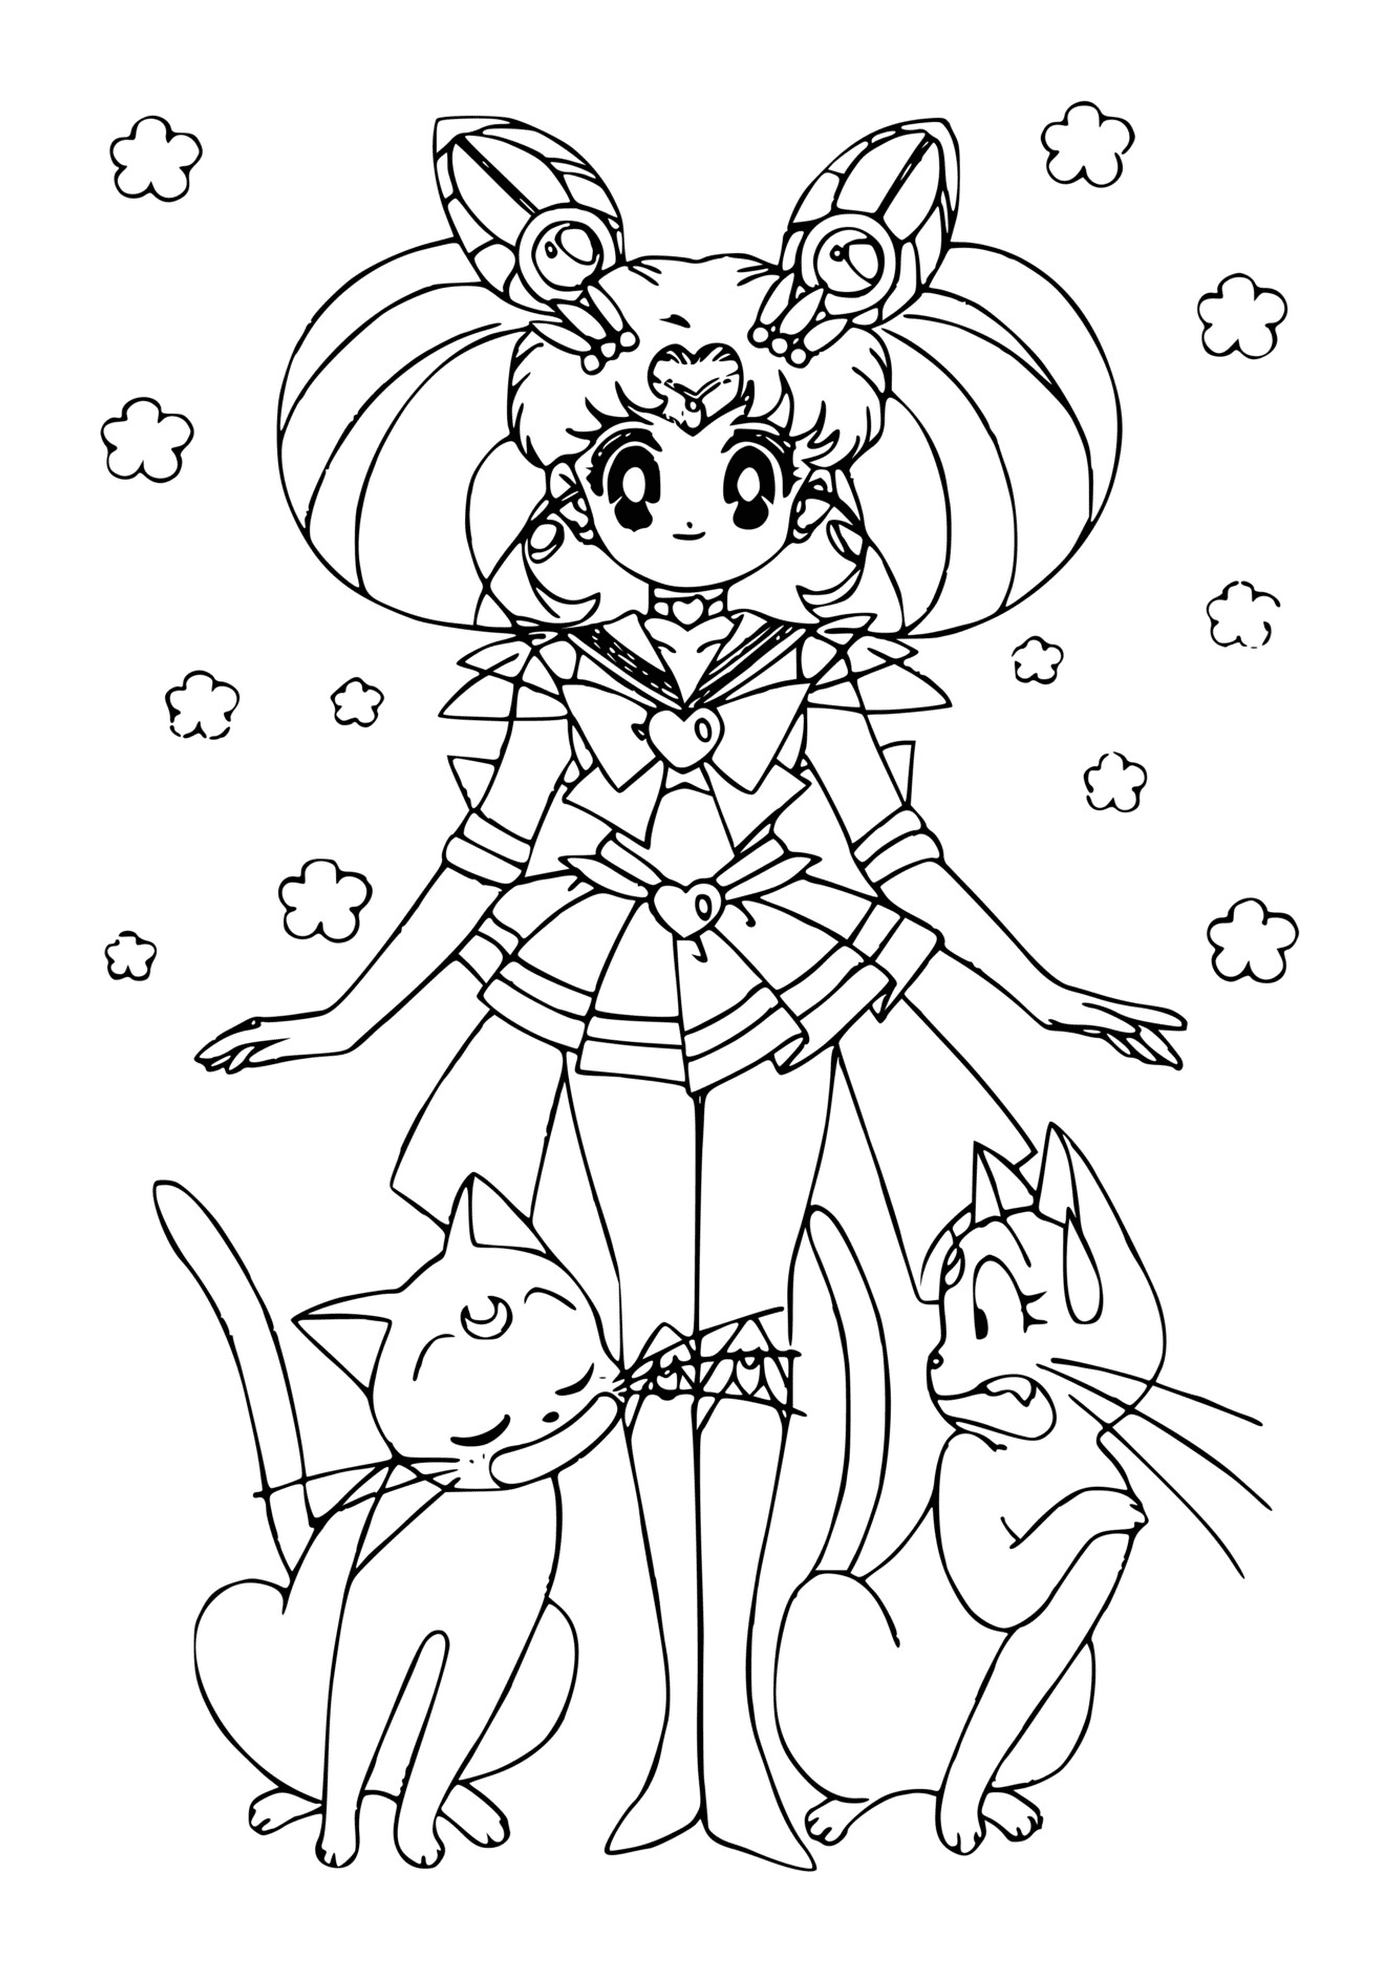  Sailor Moon and cats 